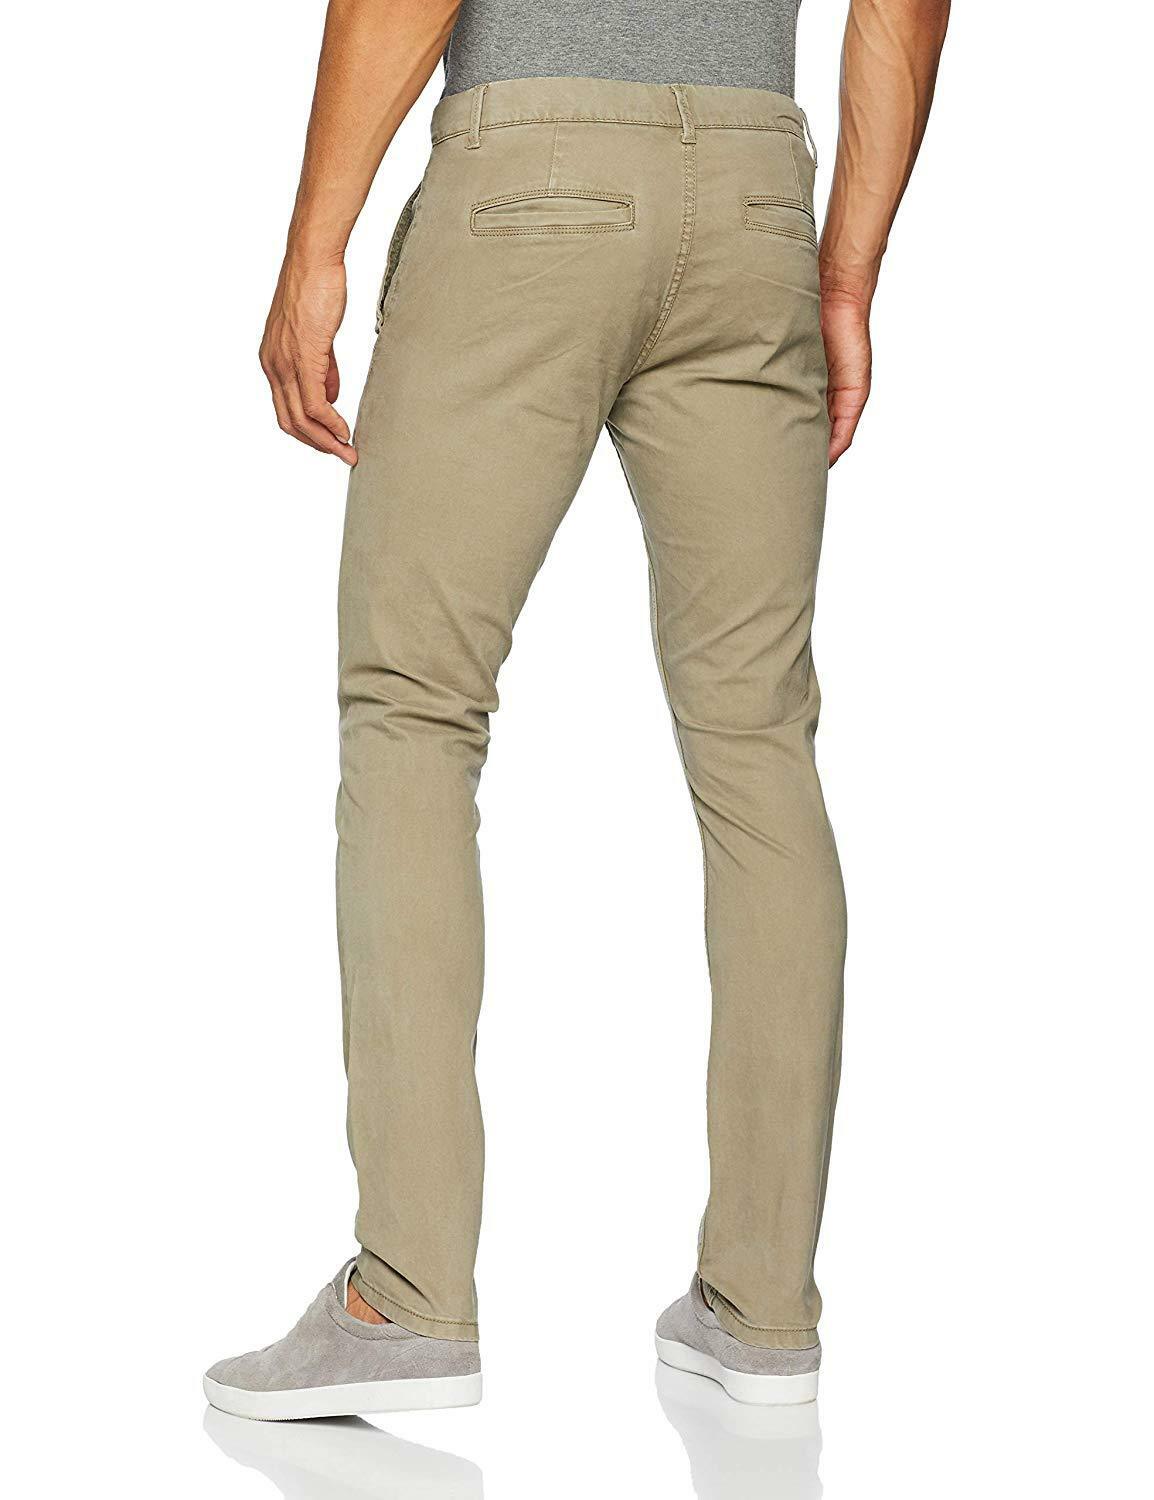 Only & Sons Mens Chino Trousers Regular Fit Cotton Stretch Jeans Casual ...